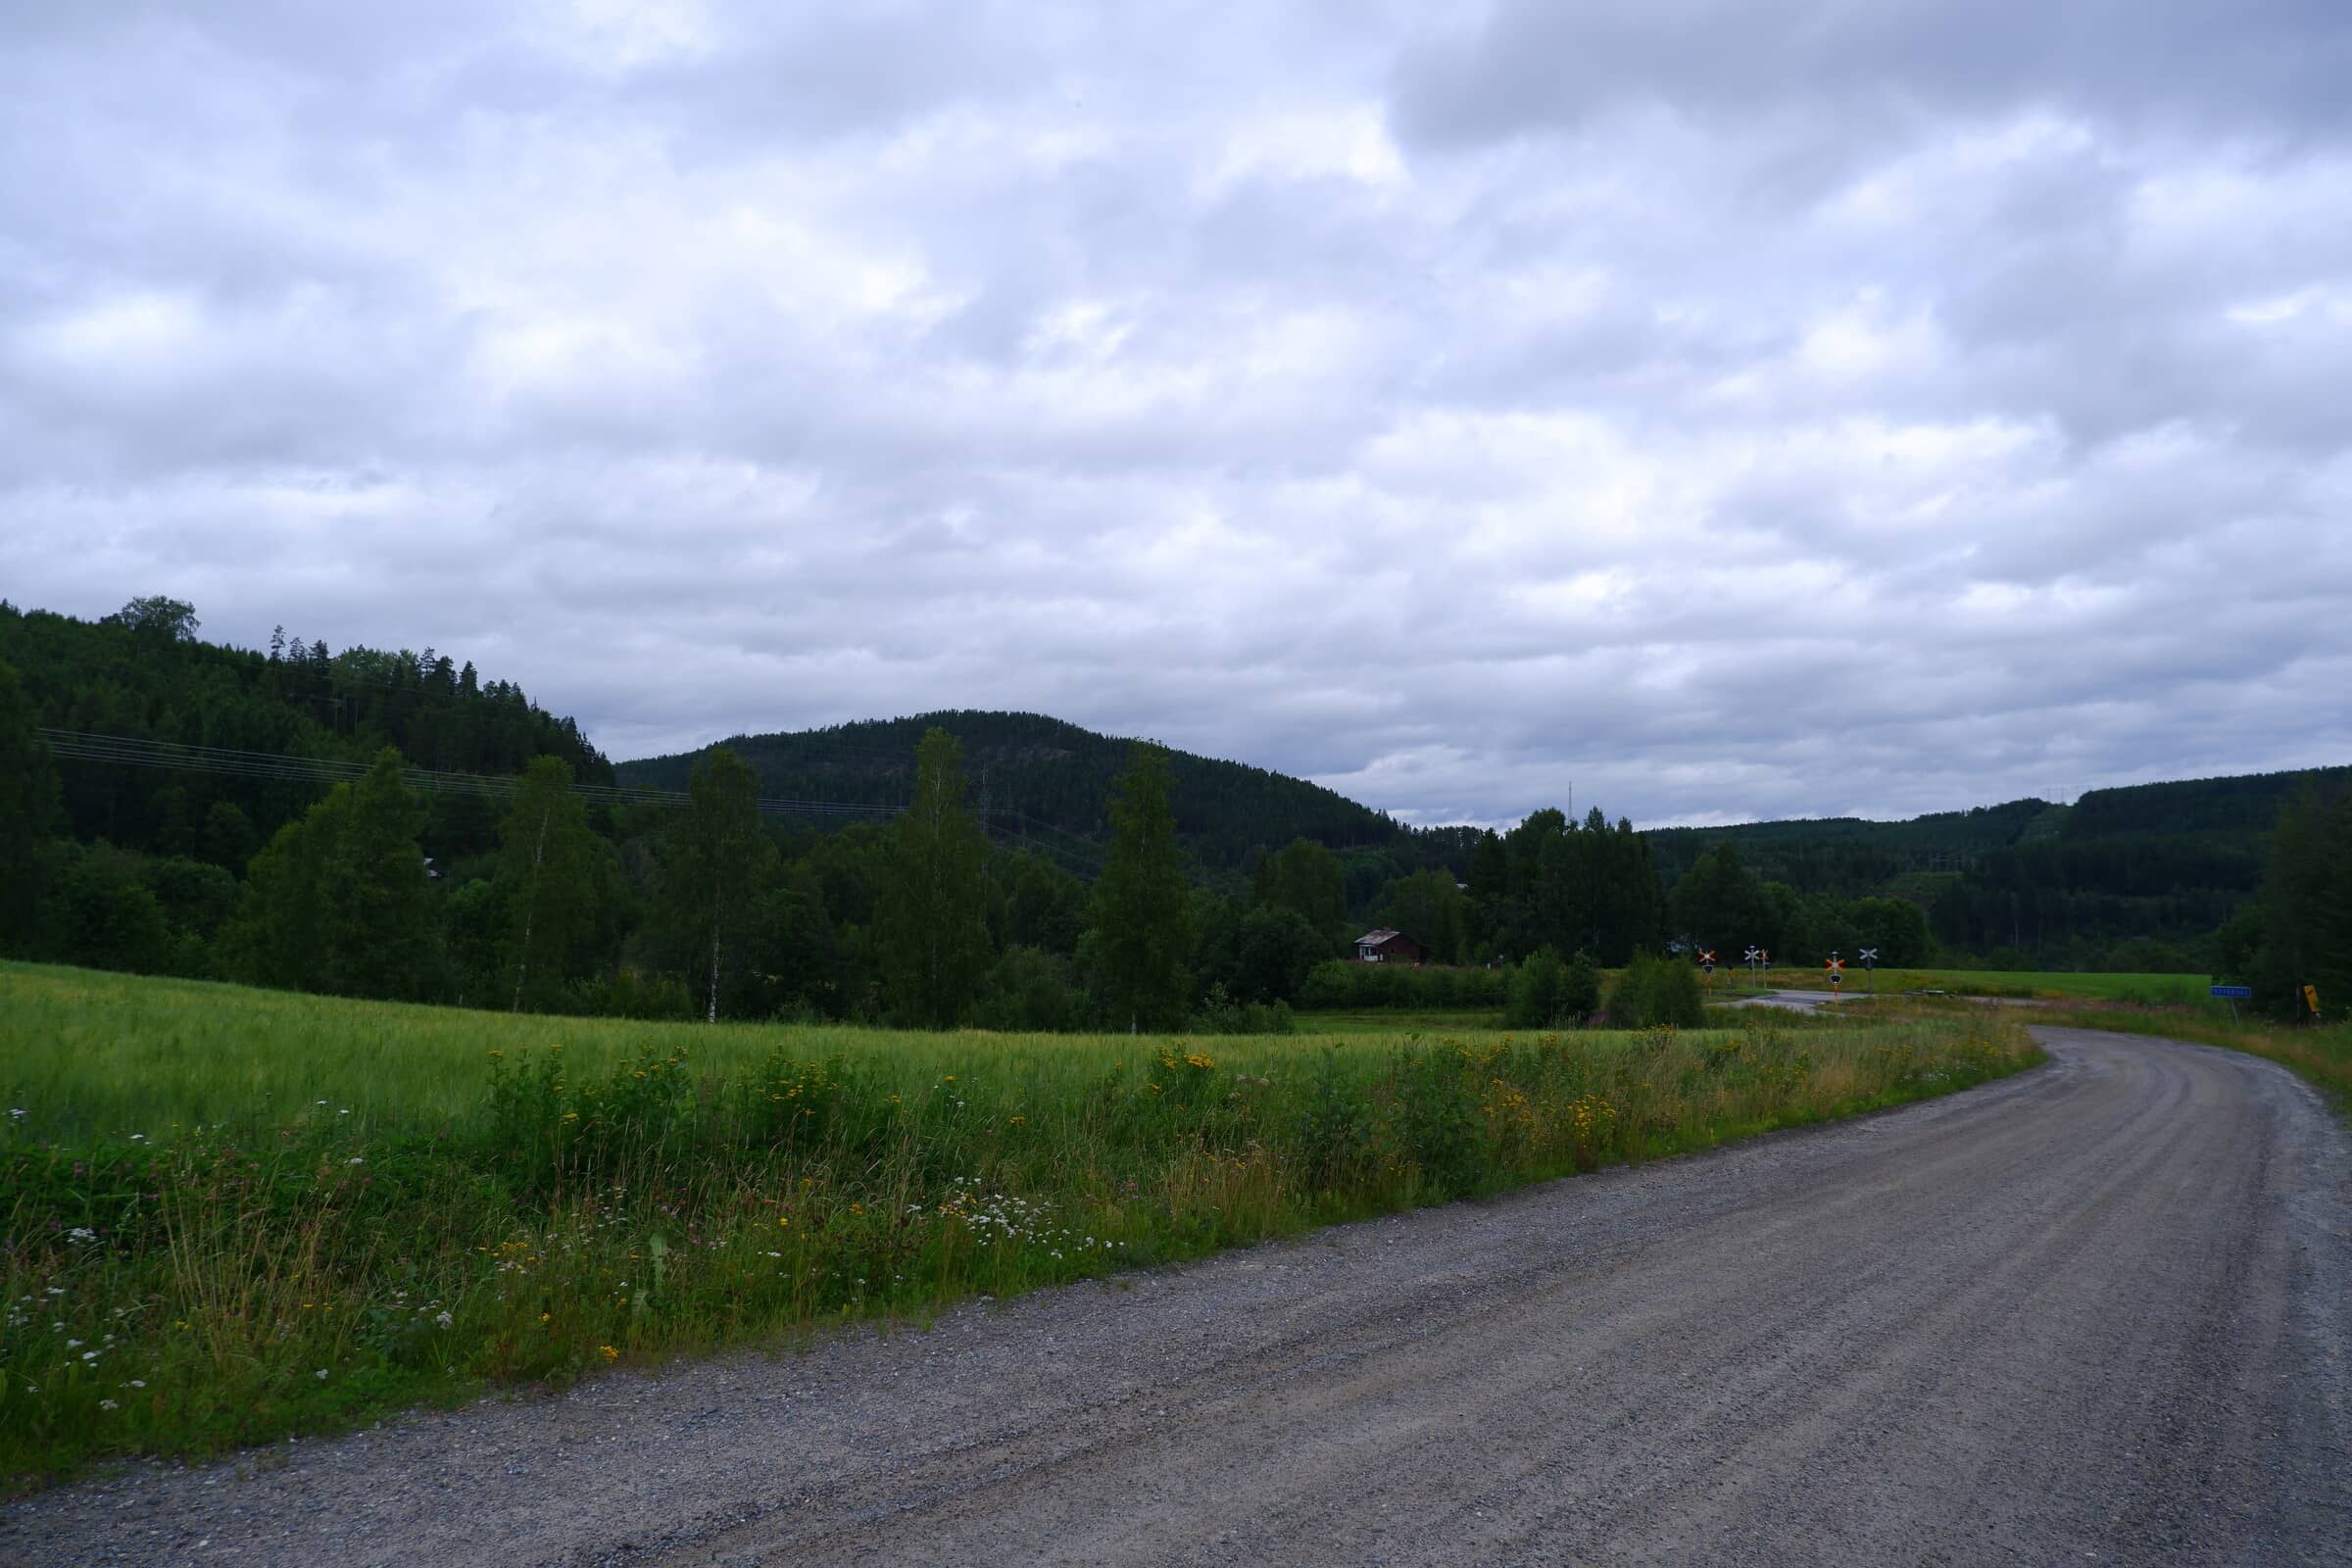 Gravel road with a railway crossing in the distance. Cloudy weather with some large hills.